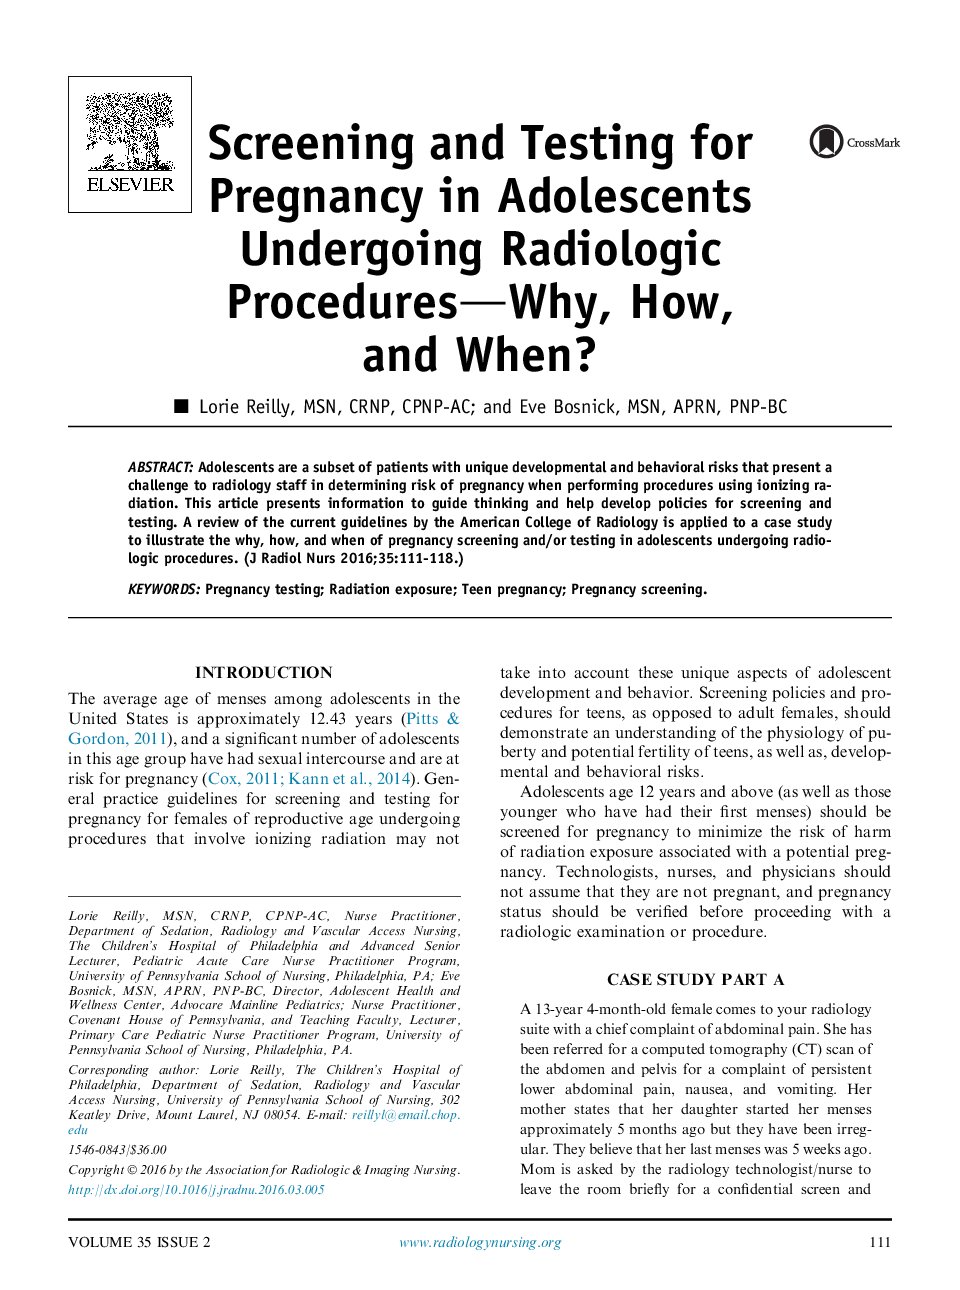 Screening and Testing for Pregnancy in Adolescents Undergoing Radiologic Procedures—Why, How, and When?